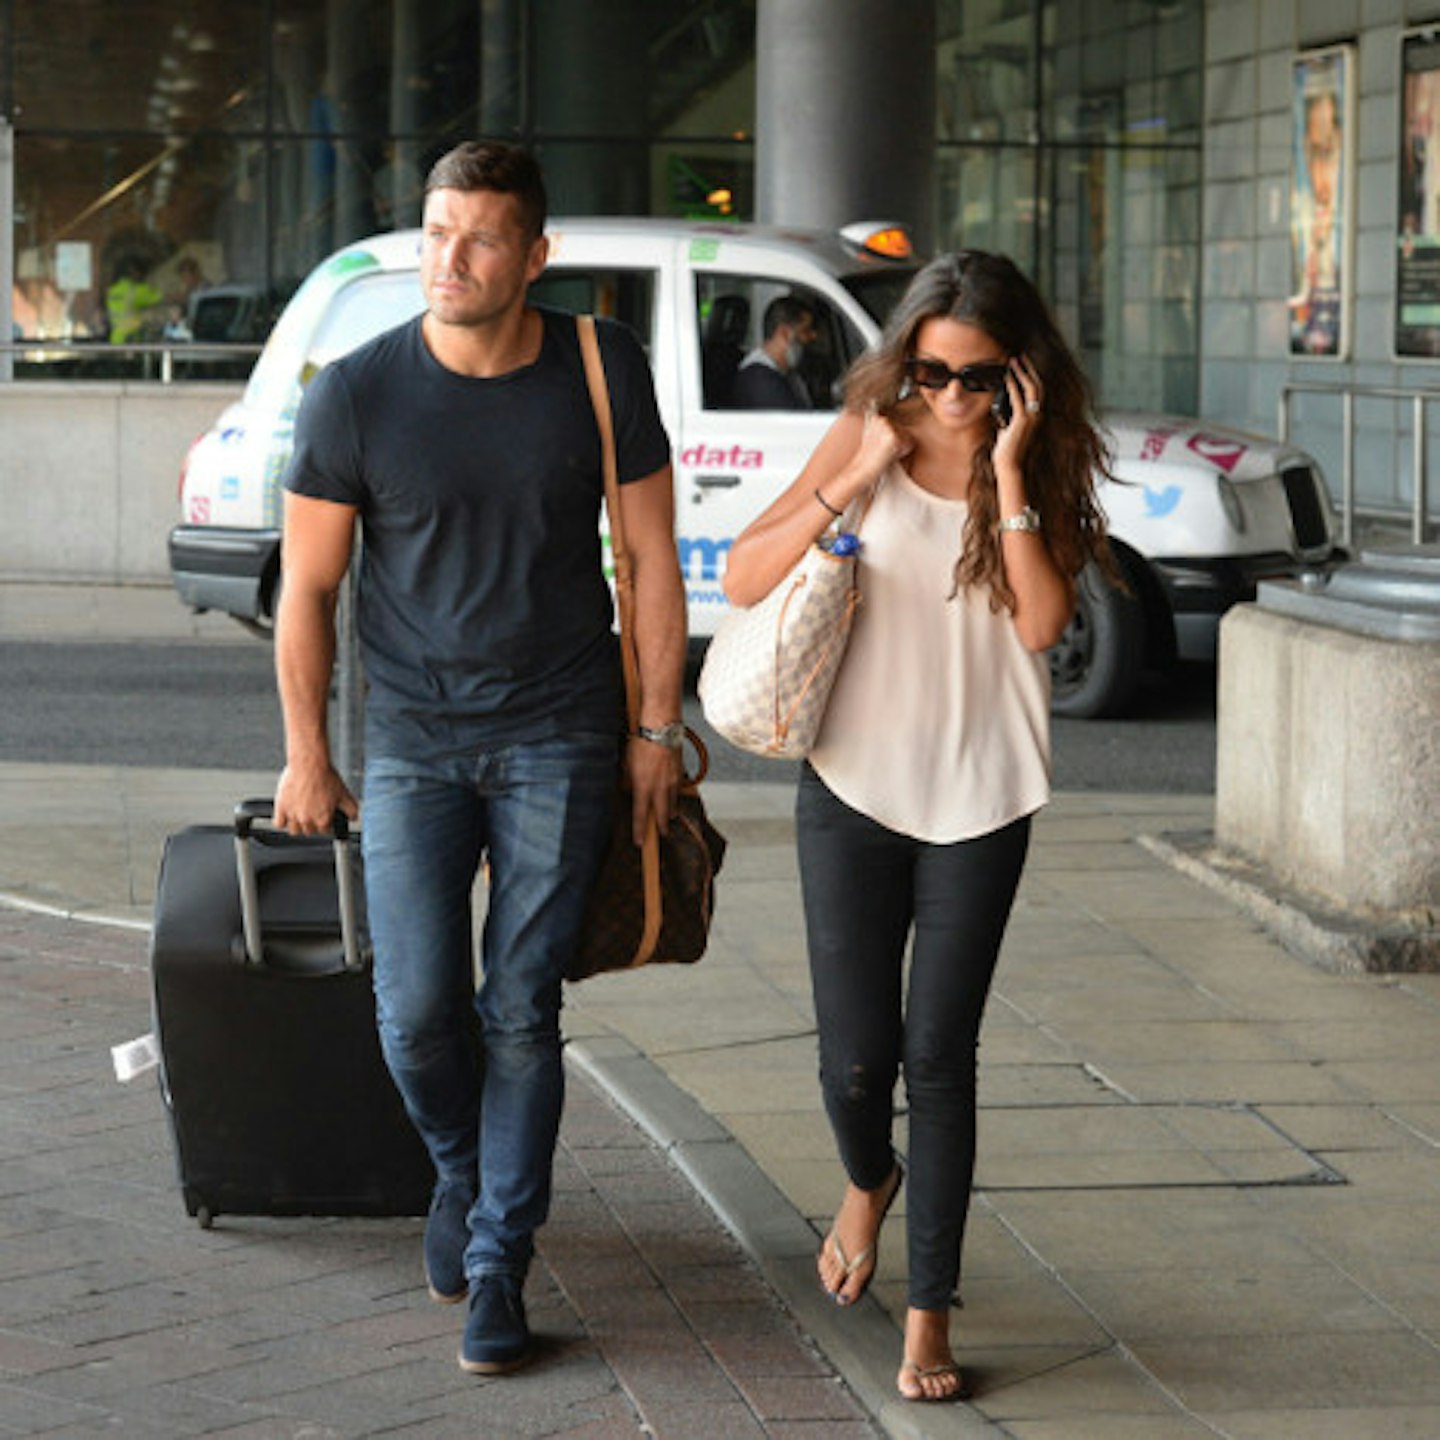 Mark and Michelle arriving in Manchester yesterday